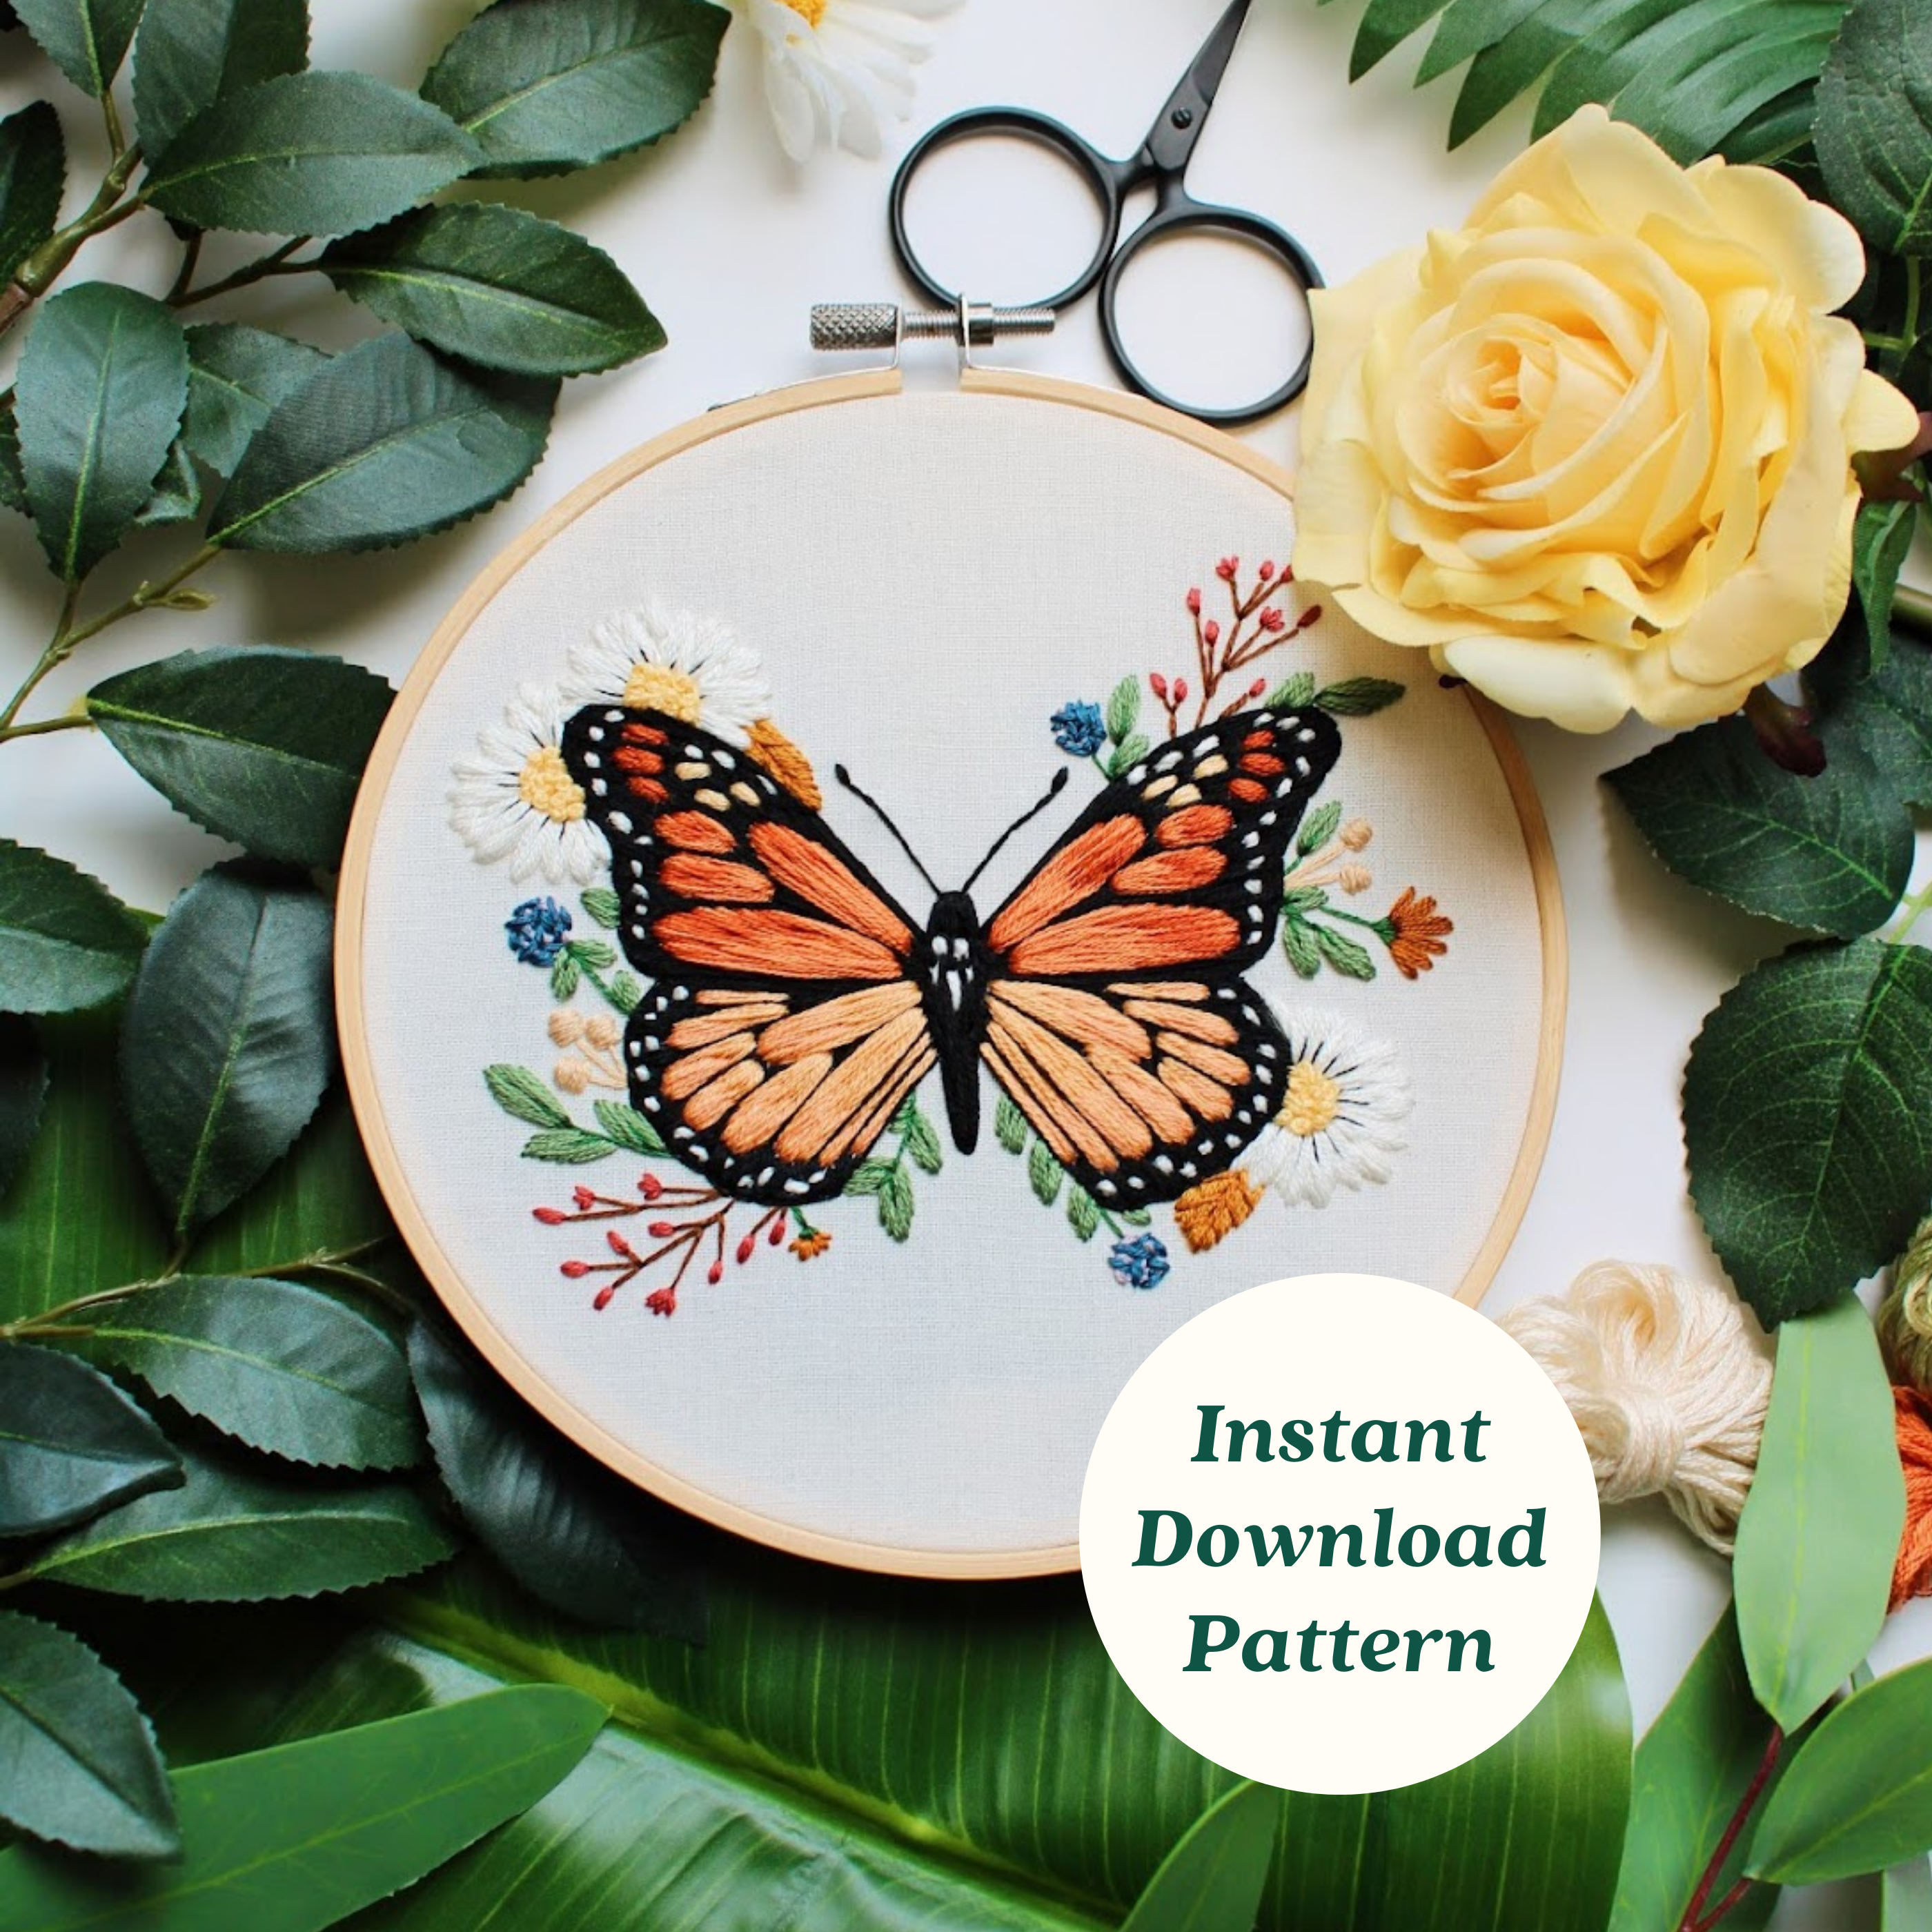 Roses Embroidery Pattern PDF Hand Embroidery Floral 